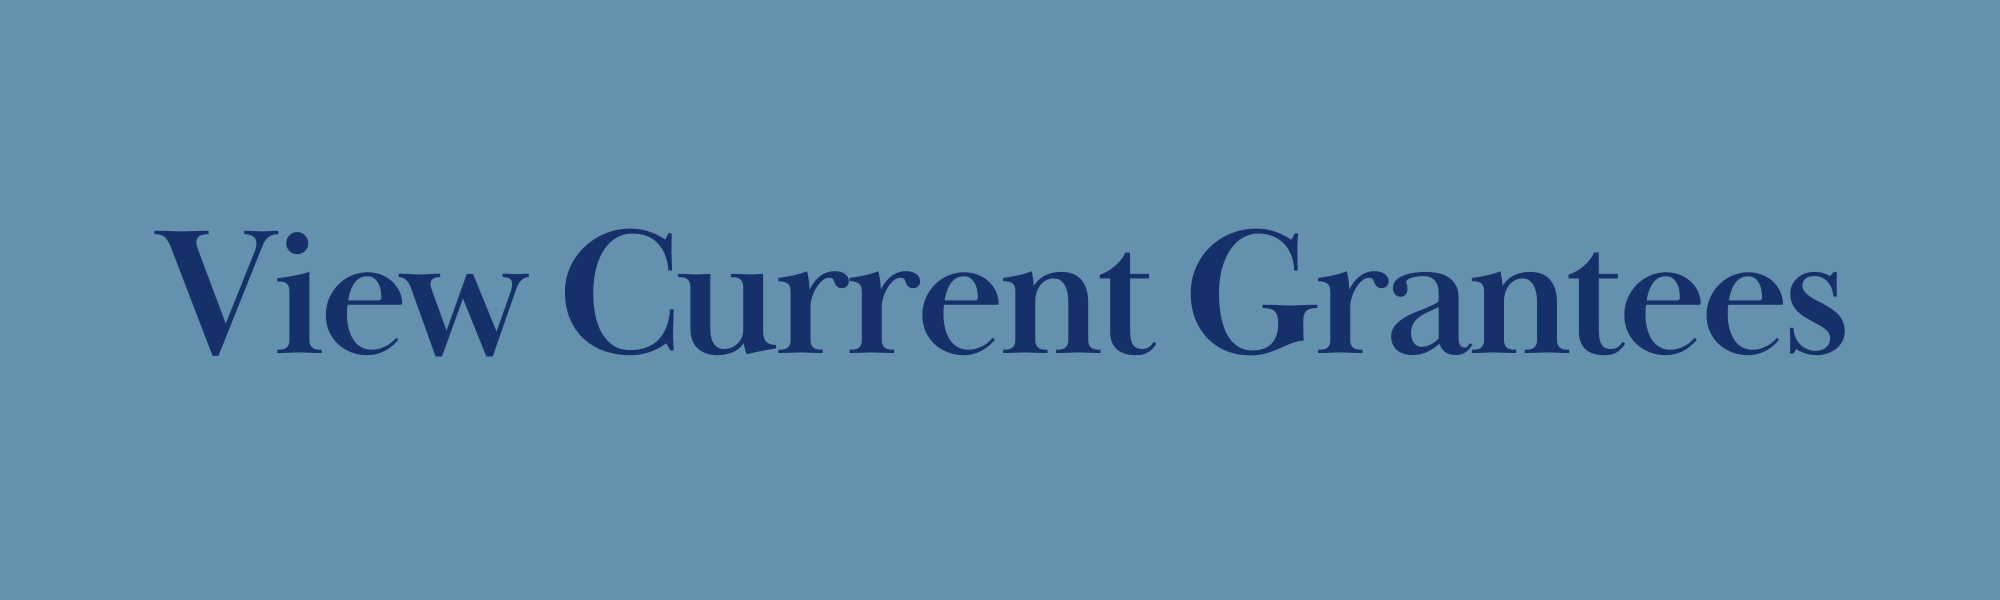 ViewCurrentGrantees_button.png